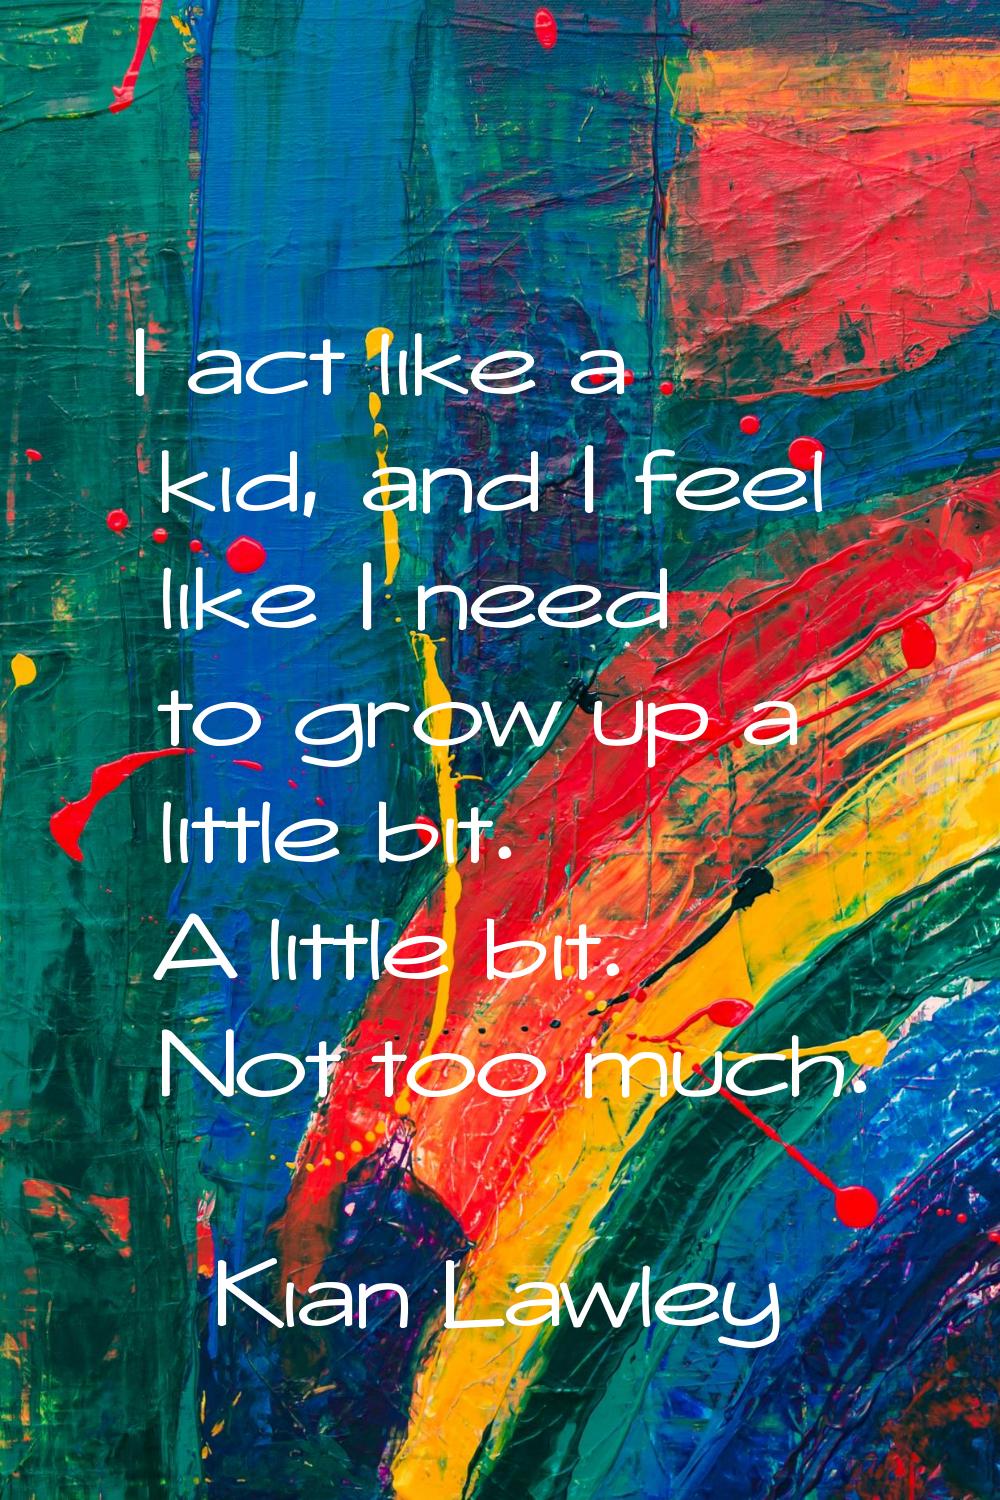 I act like a kid, and I feel like I need to grow up a little bit. A little bit. Not too much.